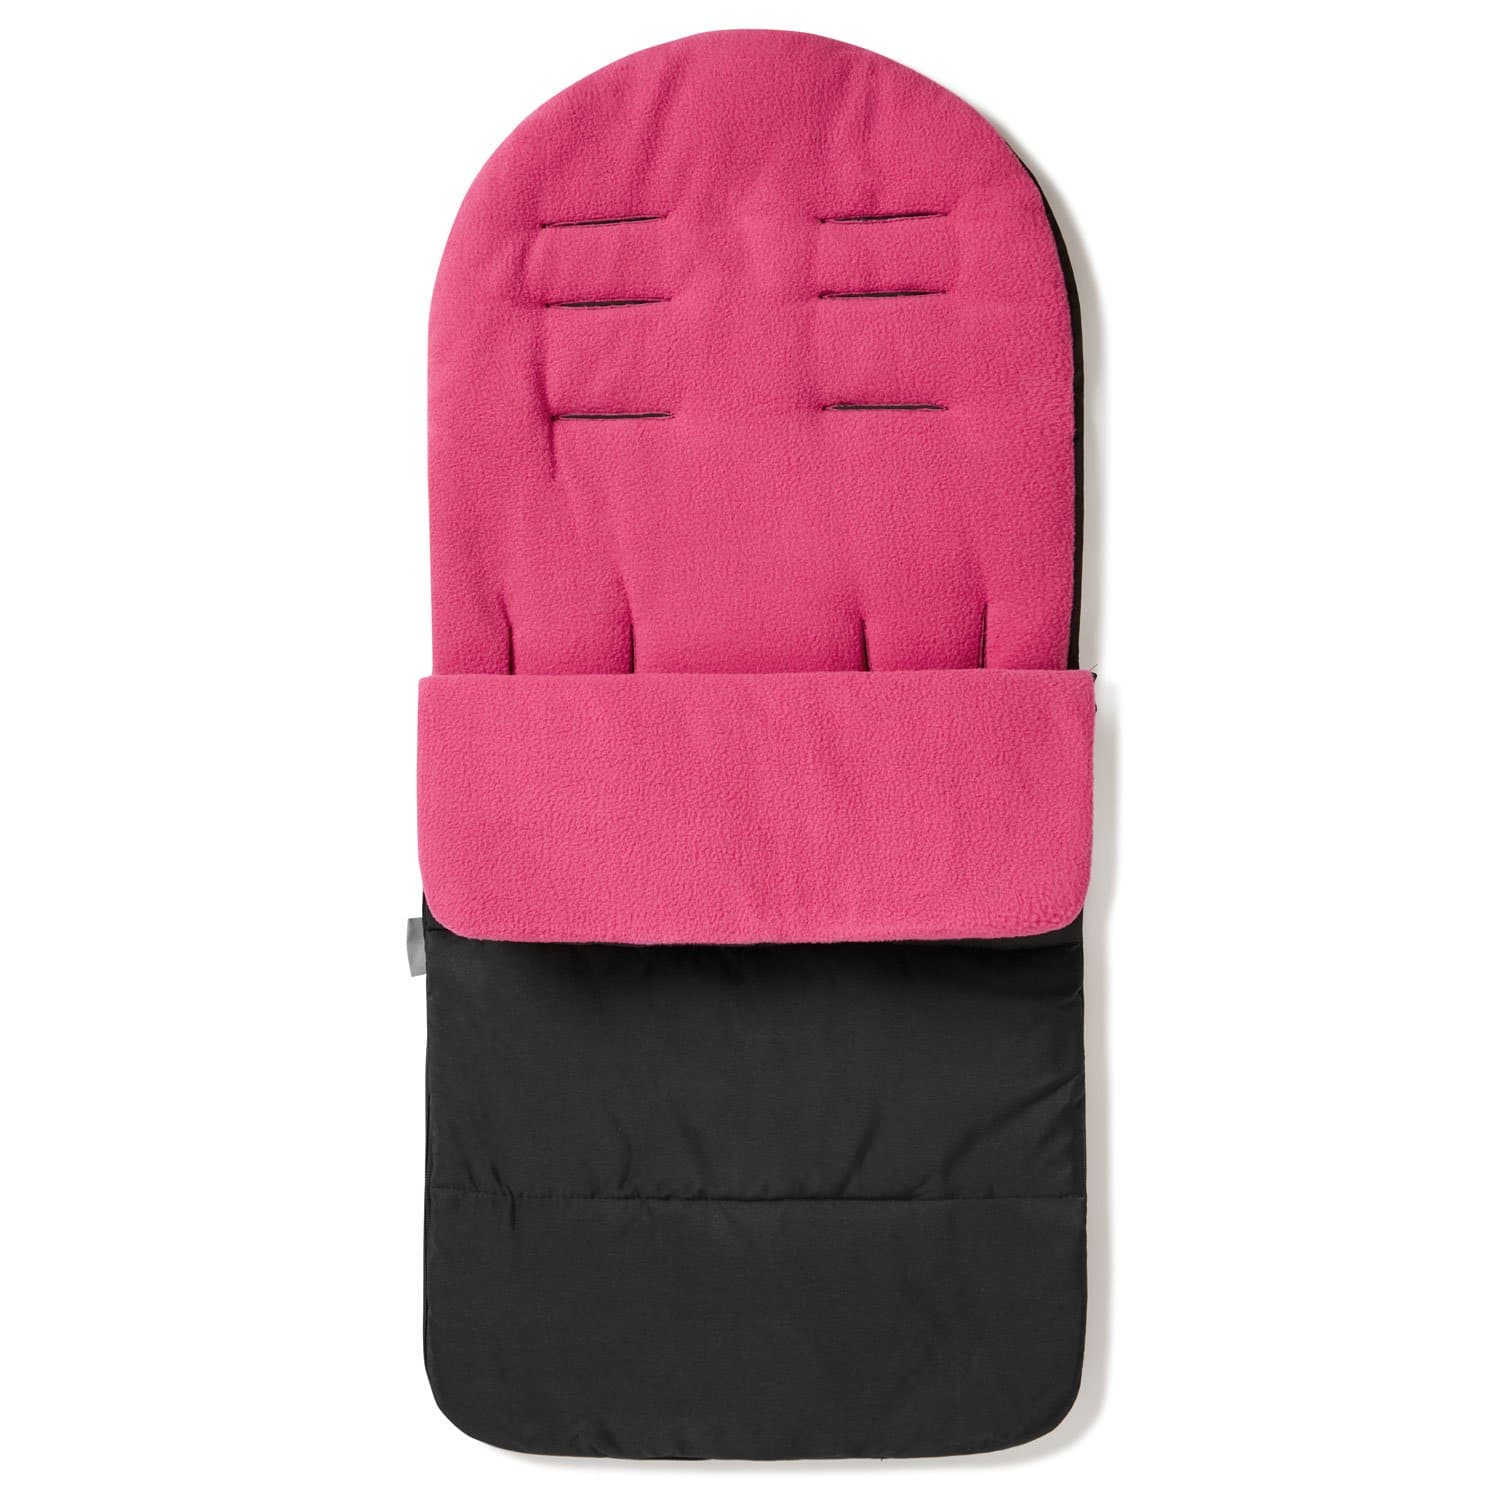 Premium Footmuff / Cosy Toes Compatible with Uppababy - Pink Rose / Fits All Models | For Your Little One